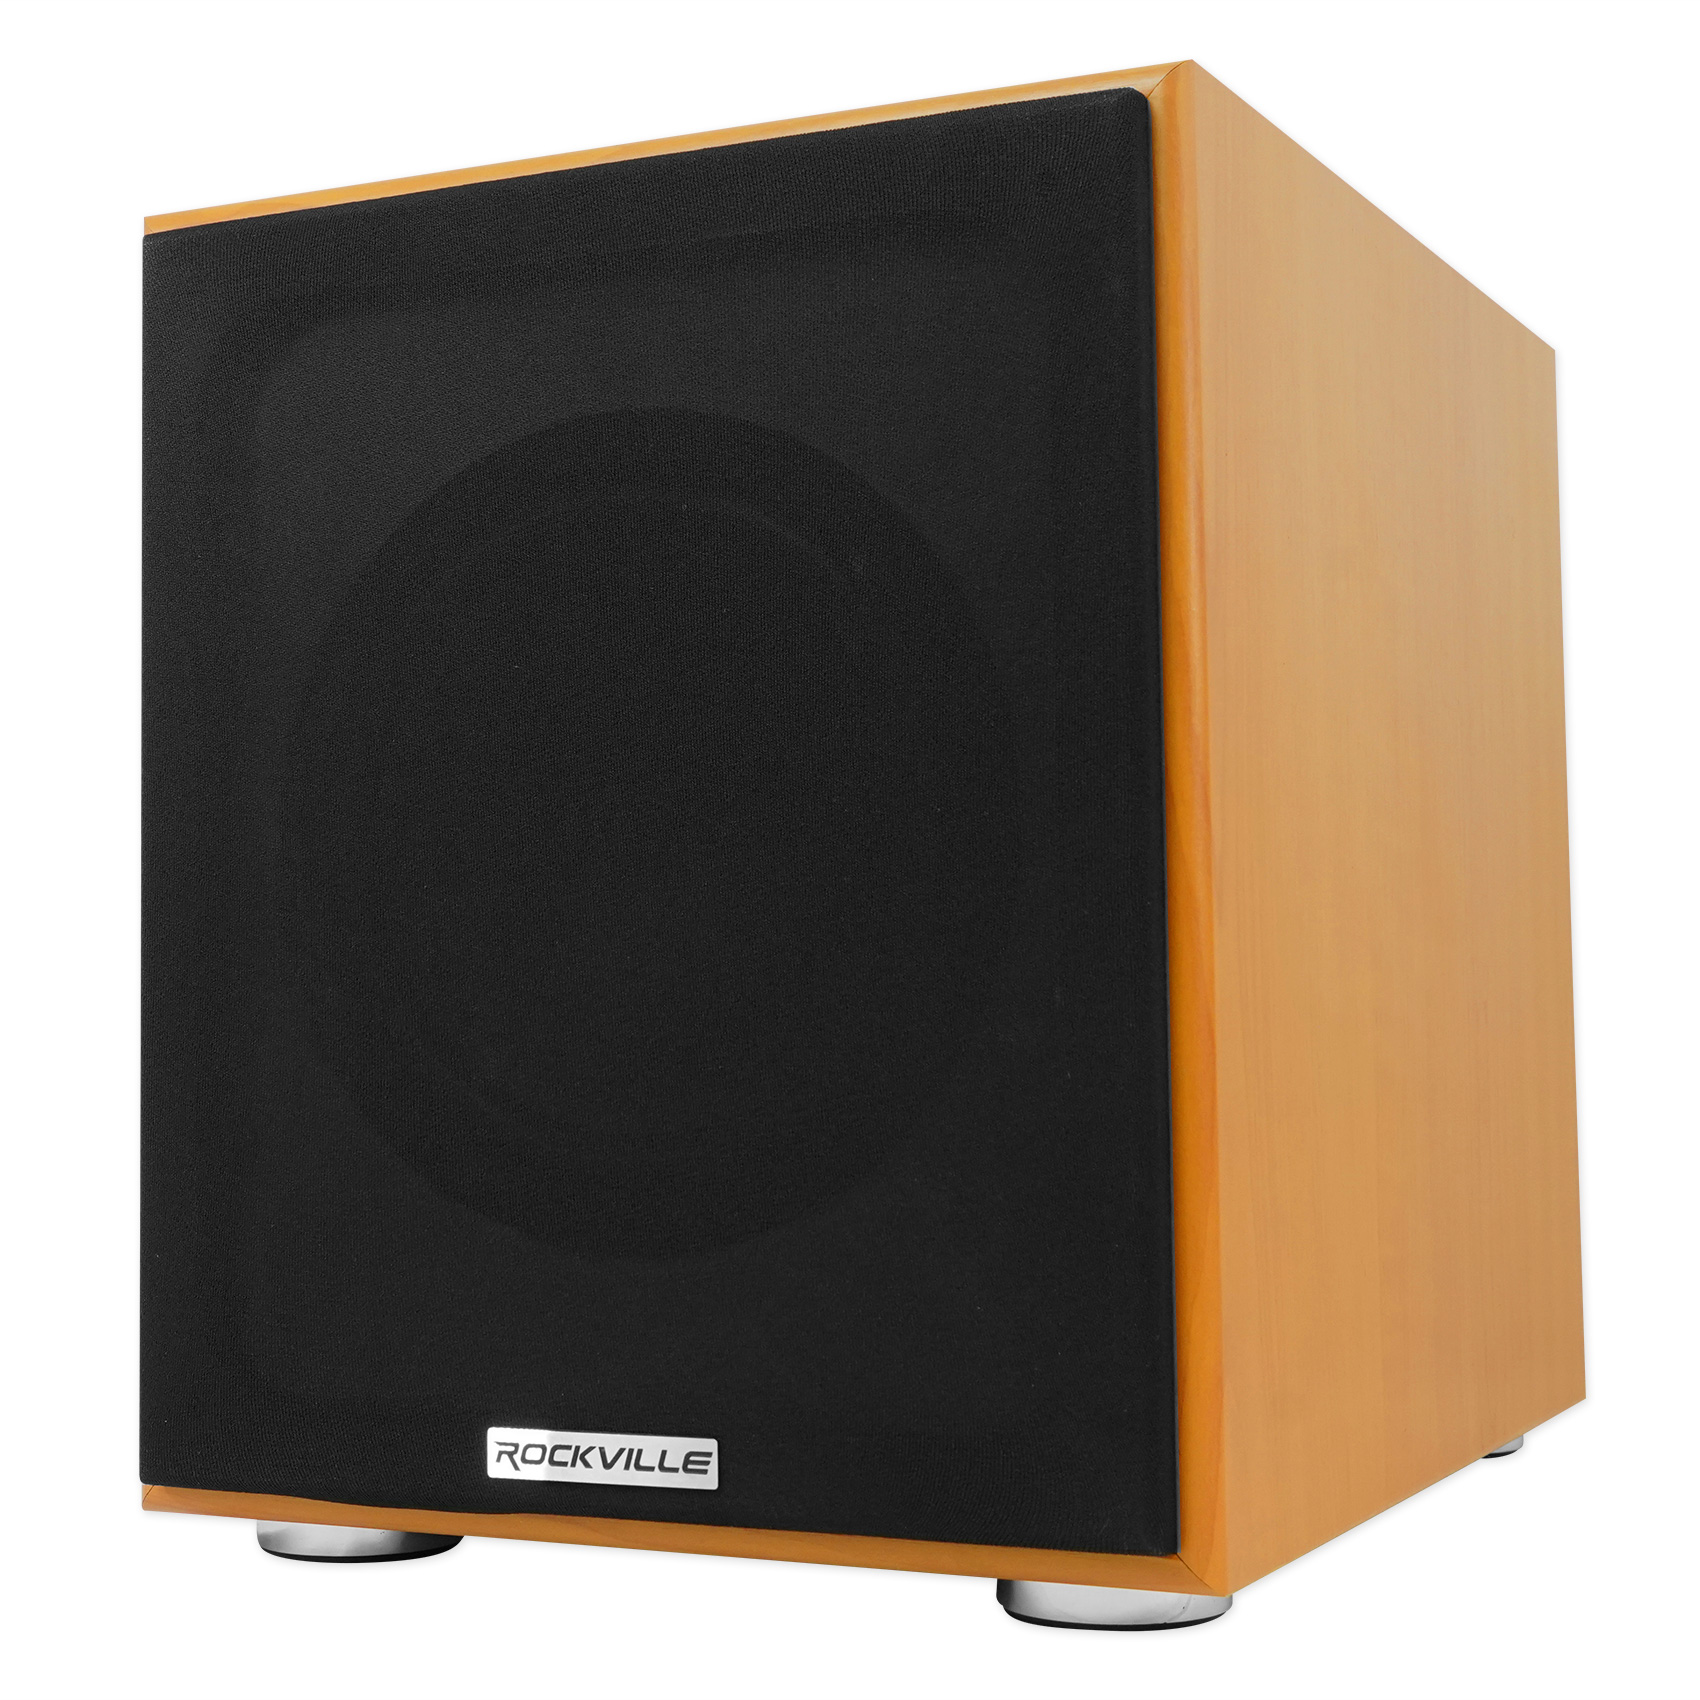 Rockville Rock Shaker 8" Classic Wood 400w Powered Home Theater Subwoofer Sub - image 1 of 10